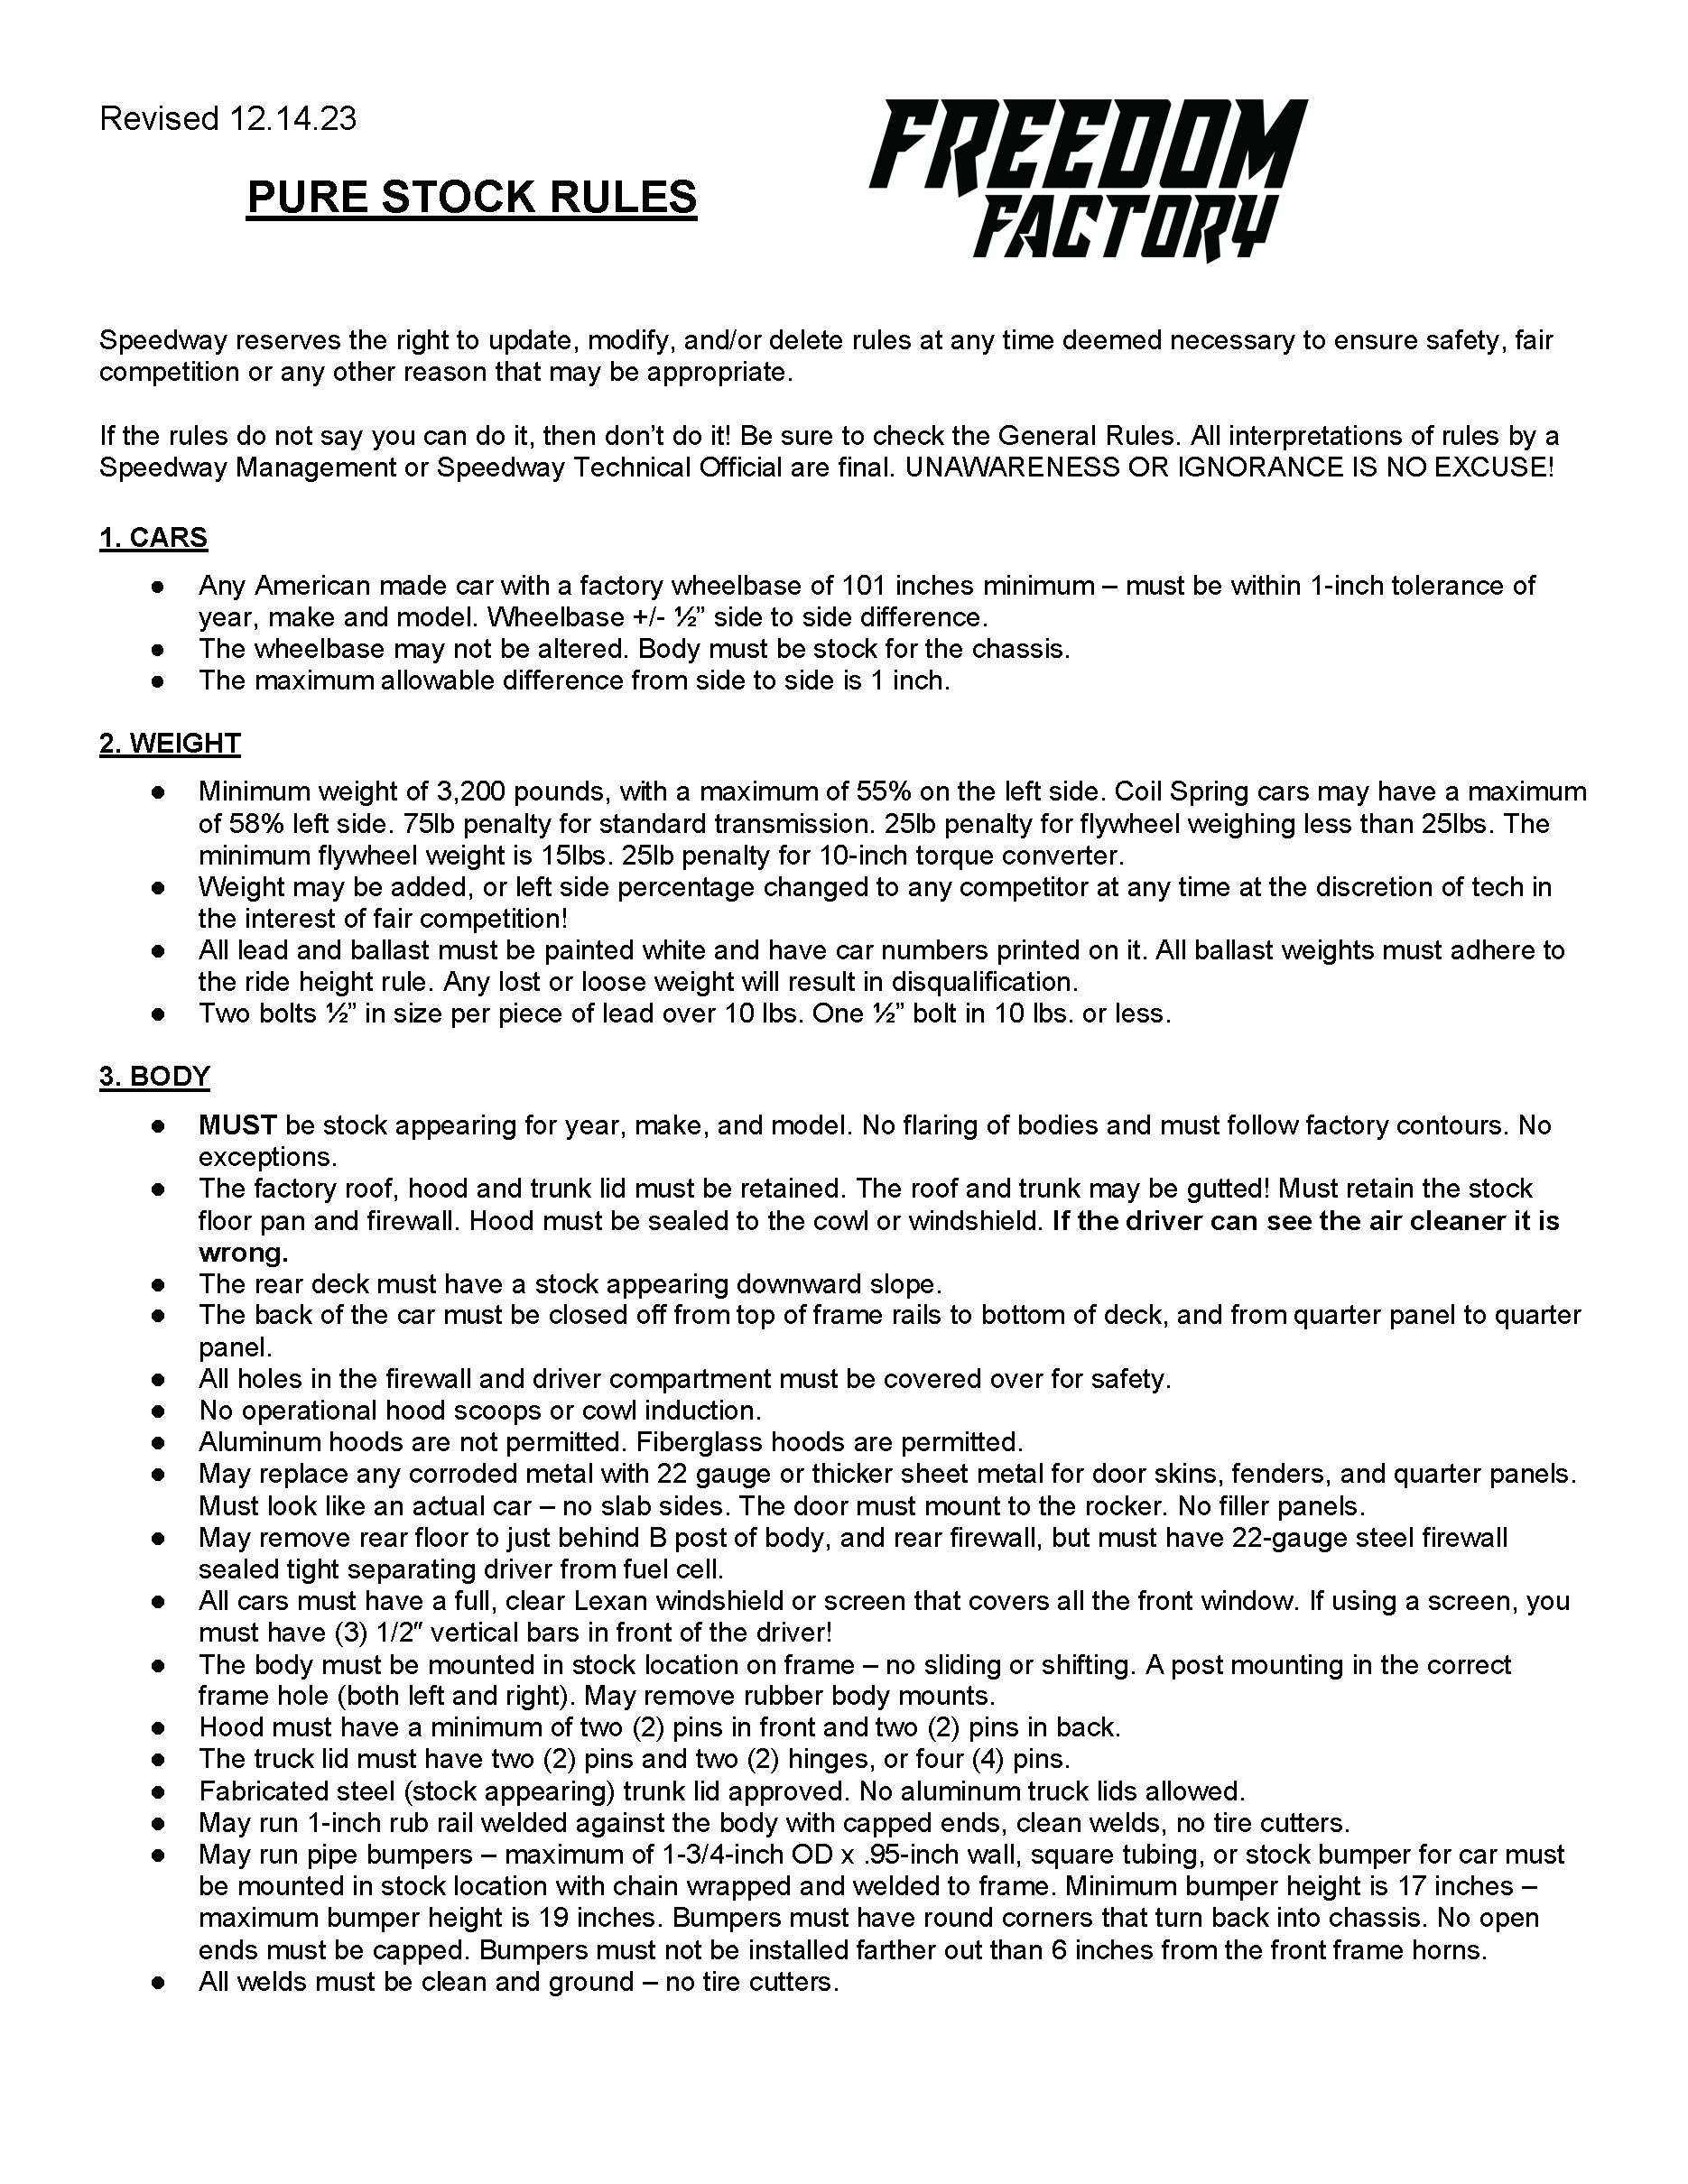 Freedom Factory Pure Stock Rules - Page 1/4